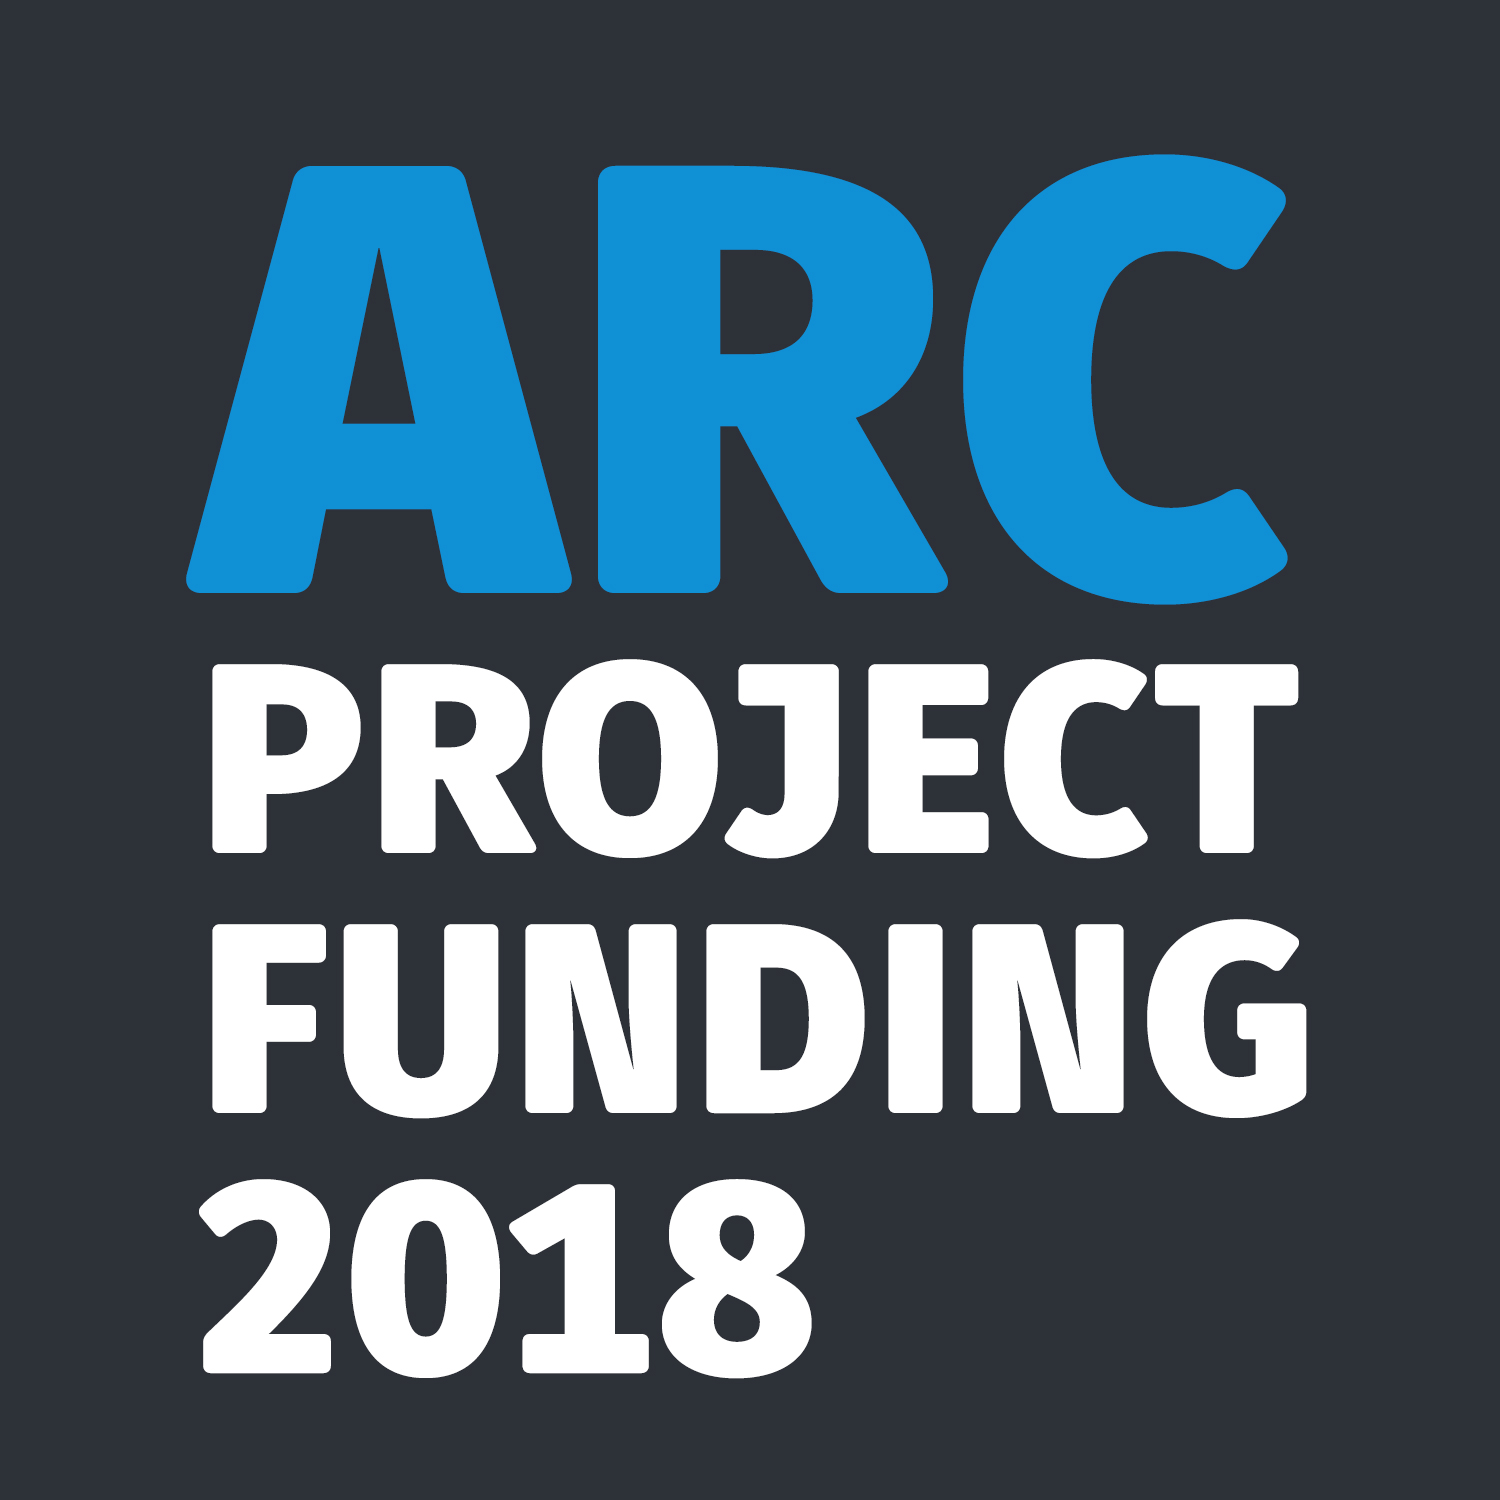 ARC project funding^empty:{ds__assetid^as_asset:asset_name}